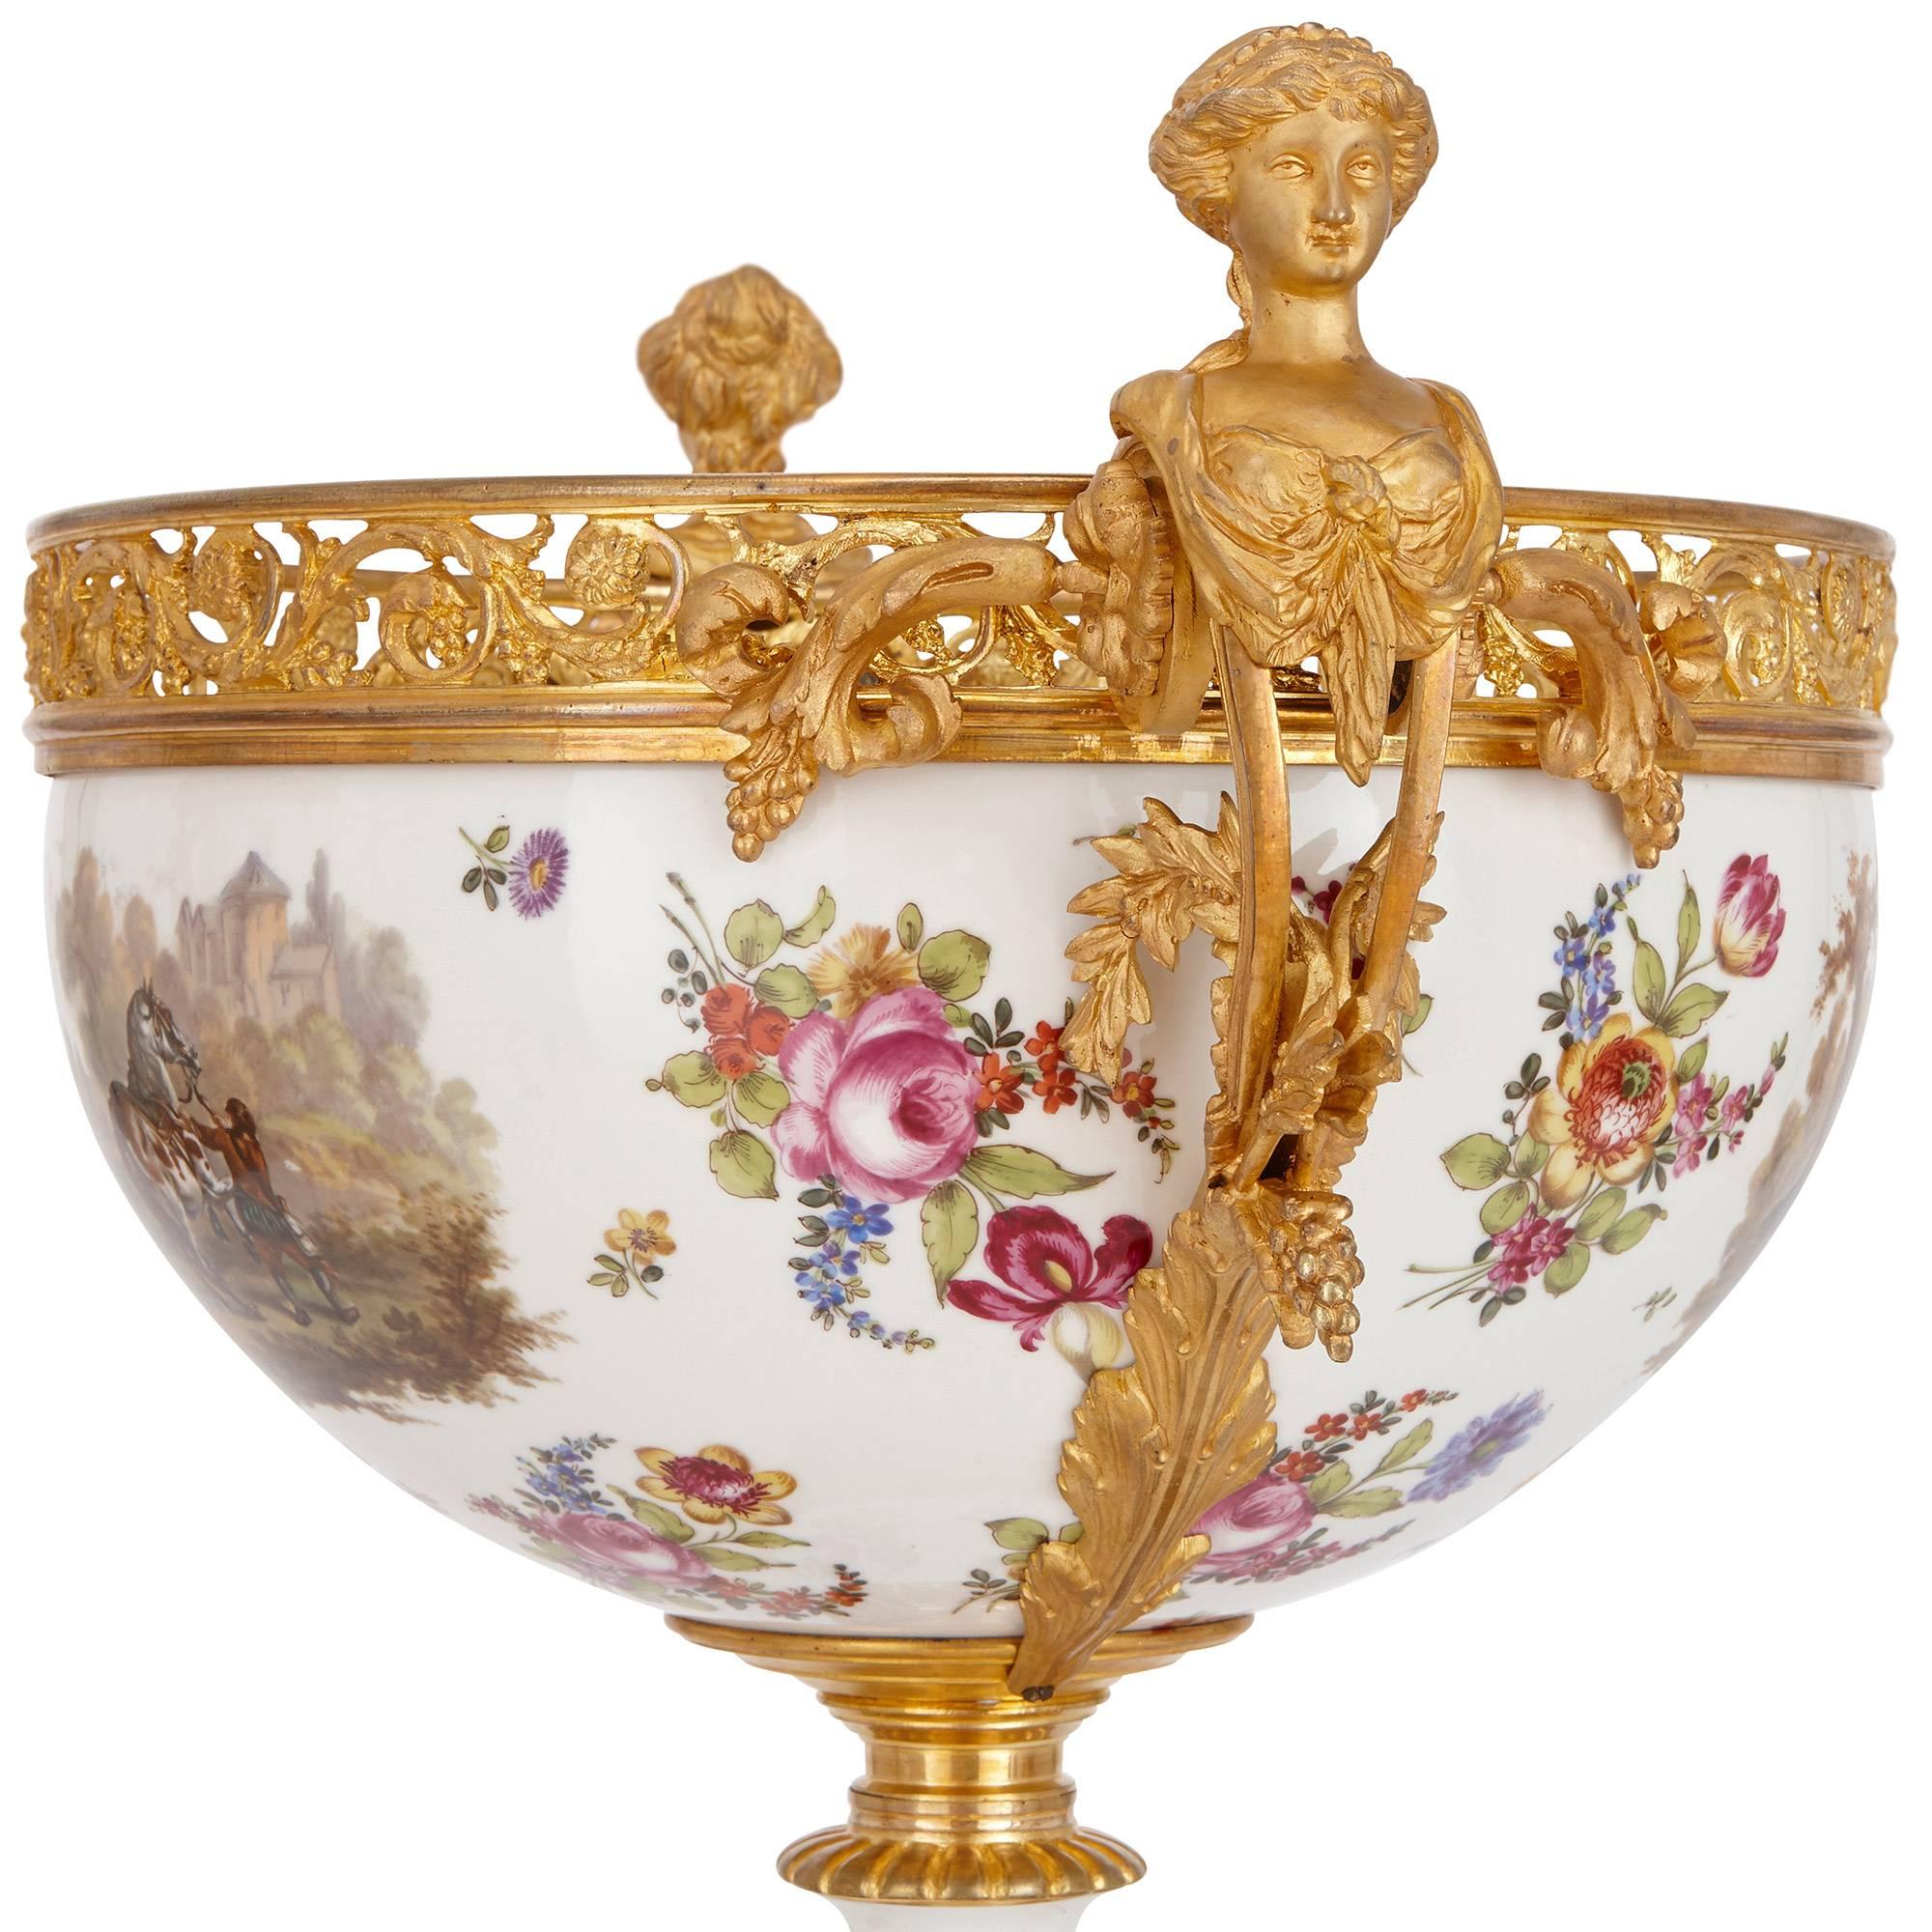 Louis XVI French Neoclassical Style Ormolu and Sèvres Porcelain Three-Piece Garniture